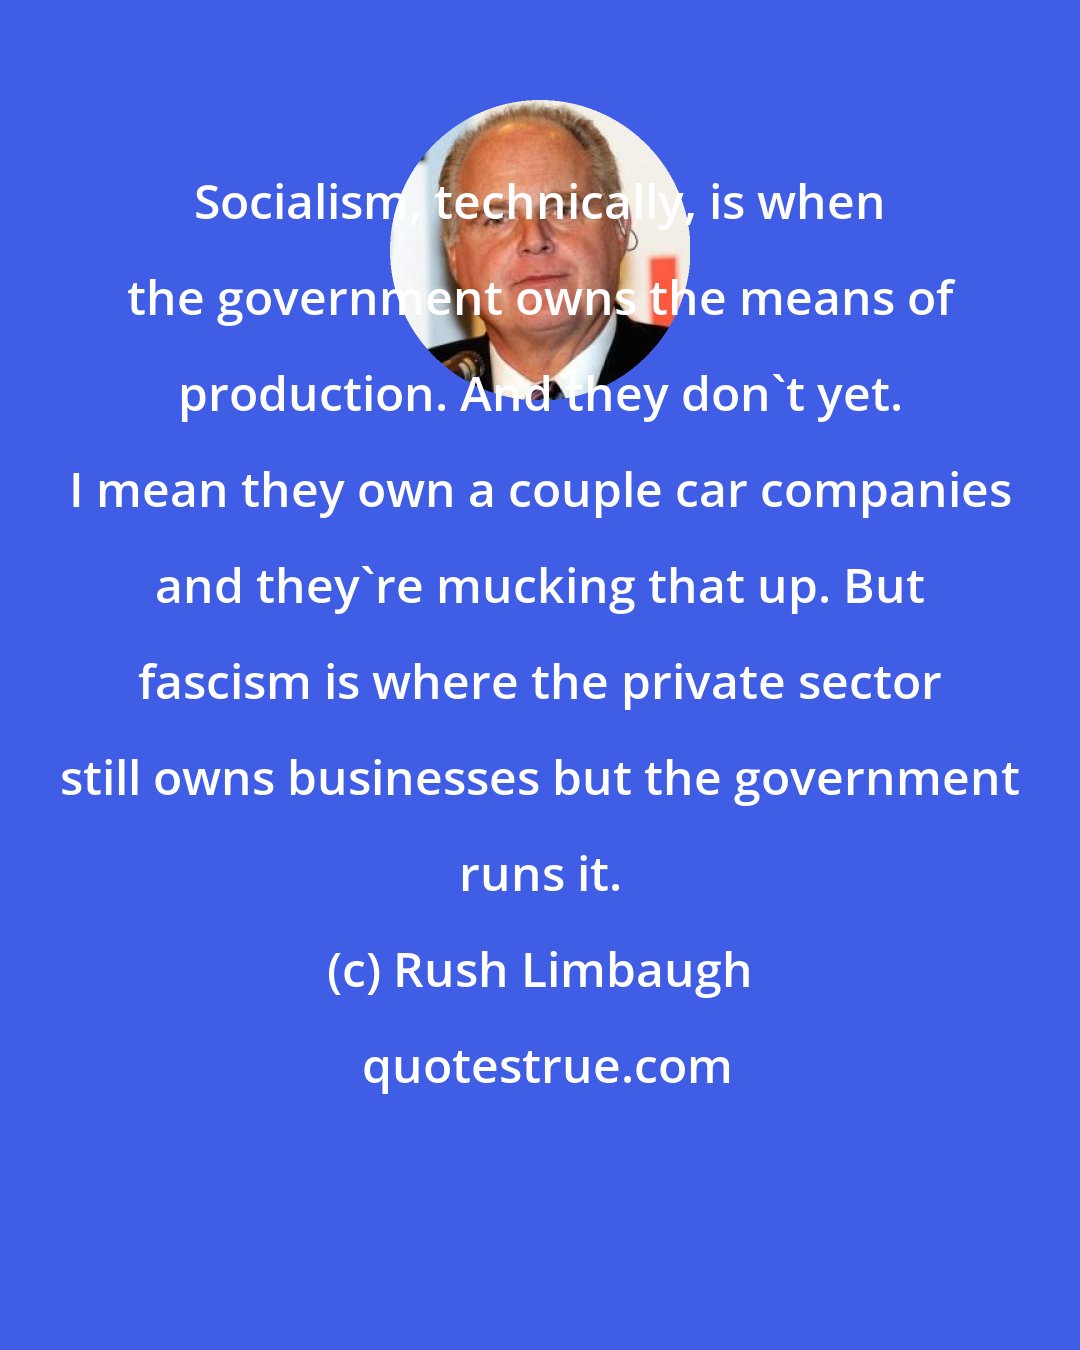 Rush Limbaugh: Socialism, technically, is when the government owns the means of production. And they don't yet. I mean they own a couple car companies and they're mucking that up. But fascism is where the private sector still owns businesses but the government runs it.